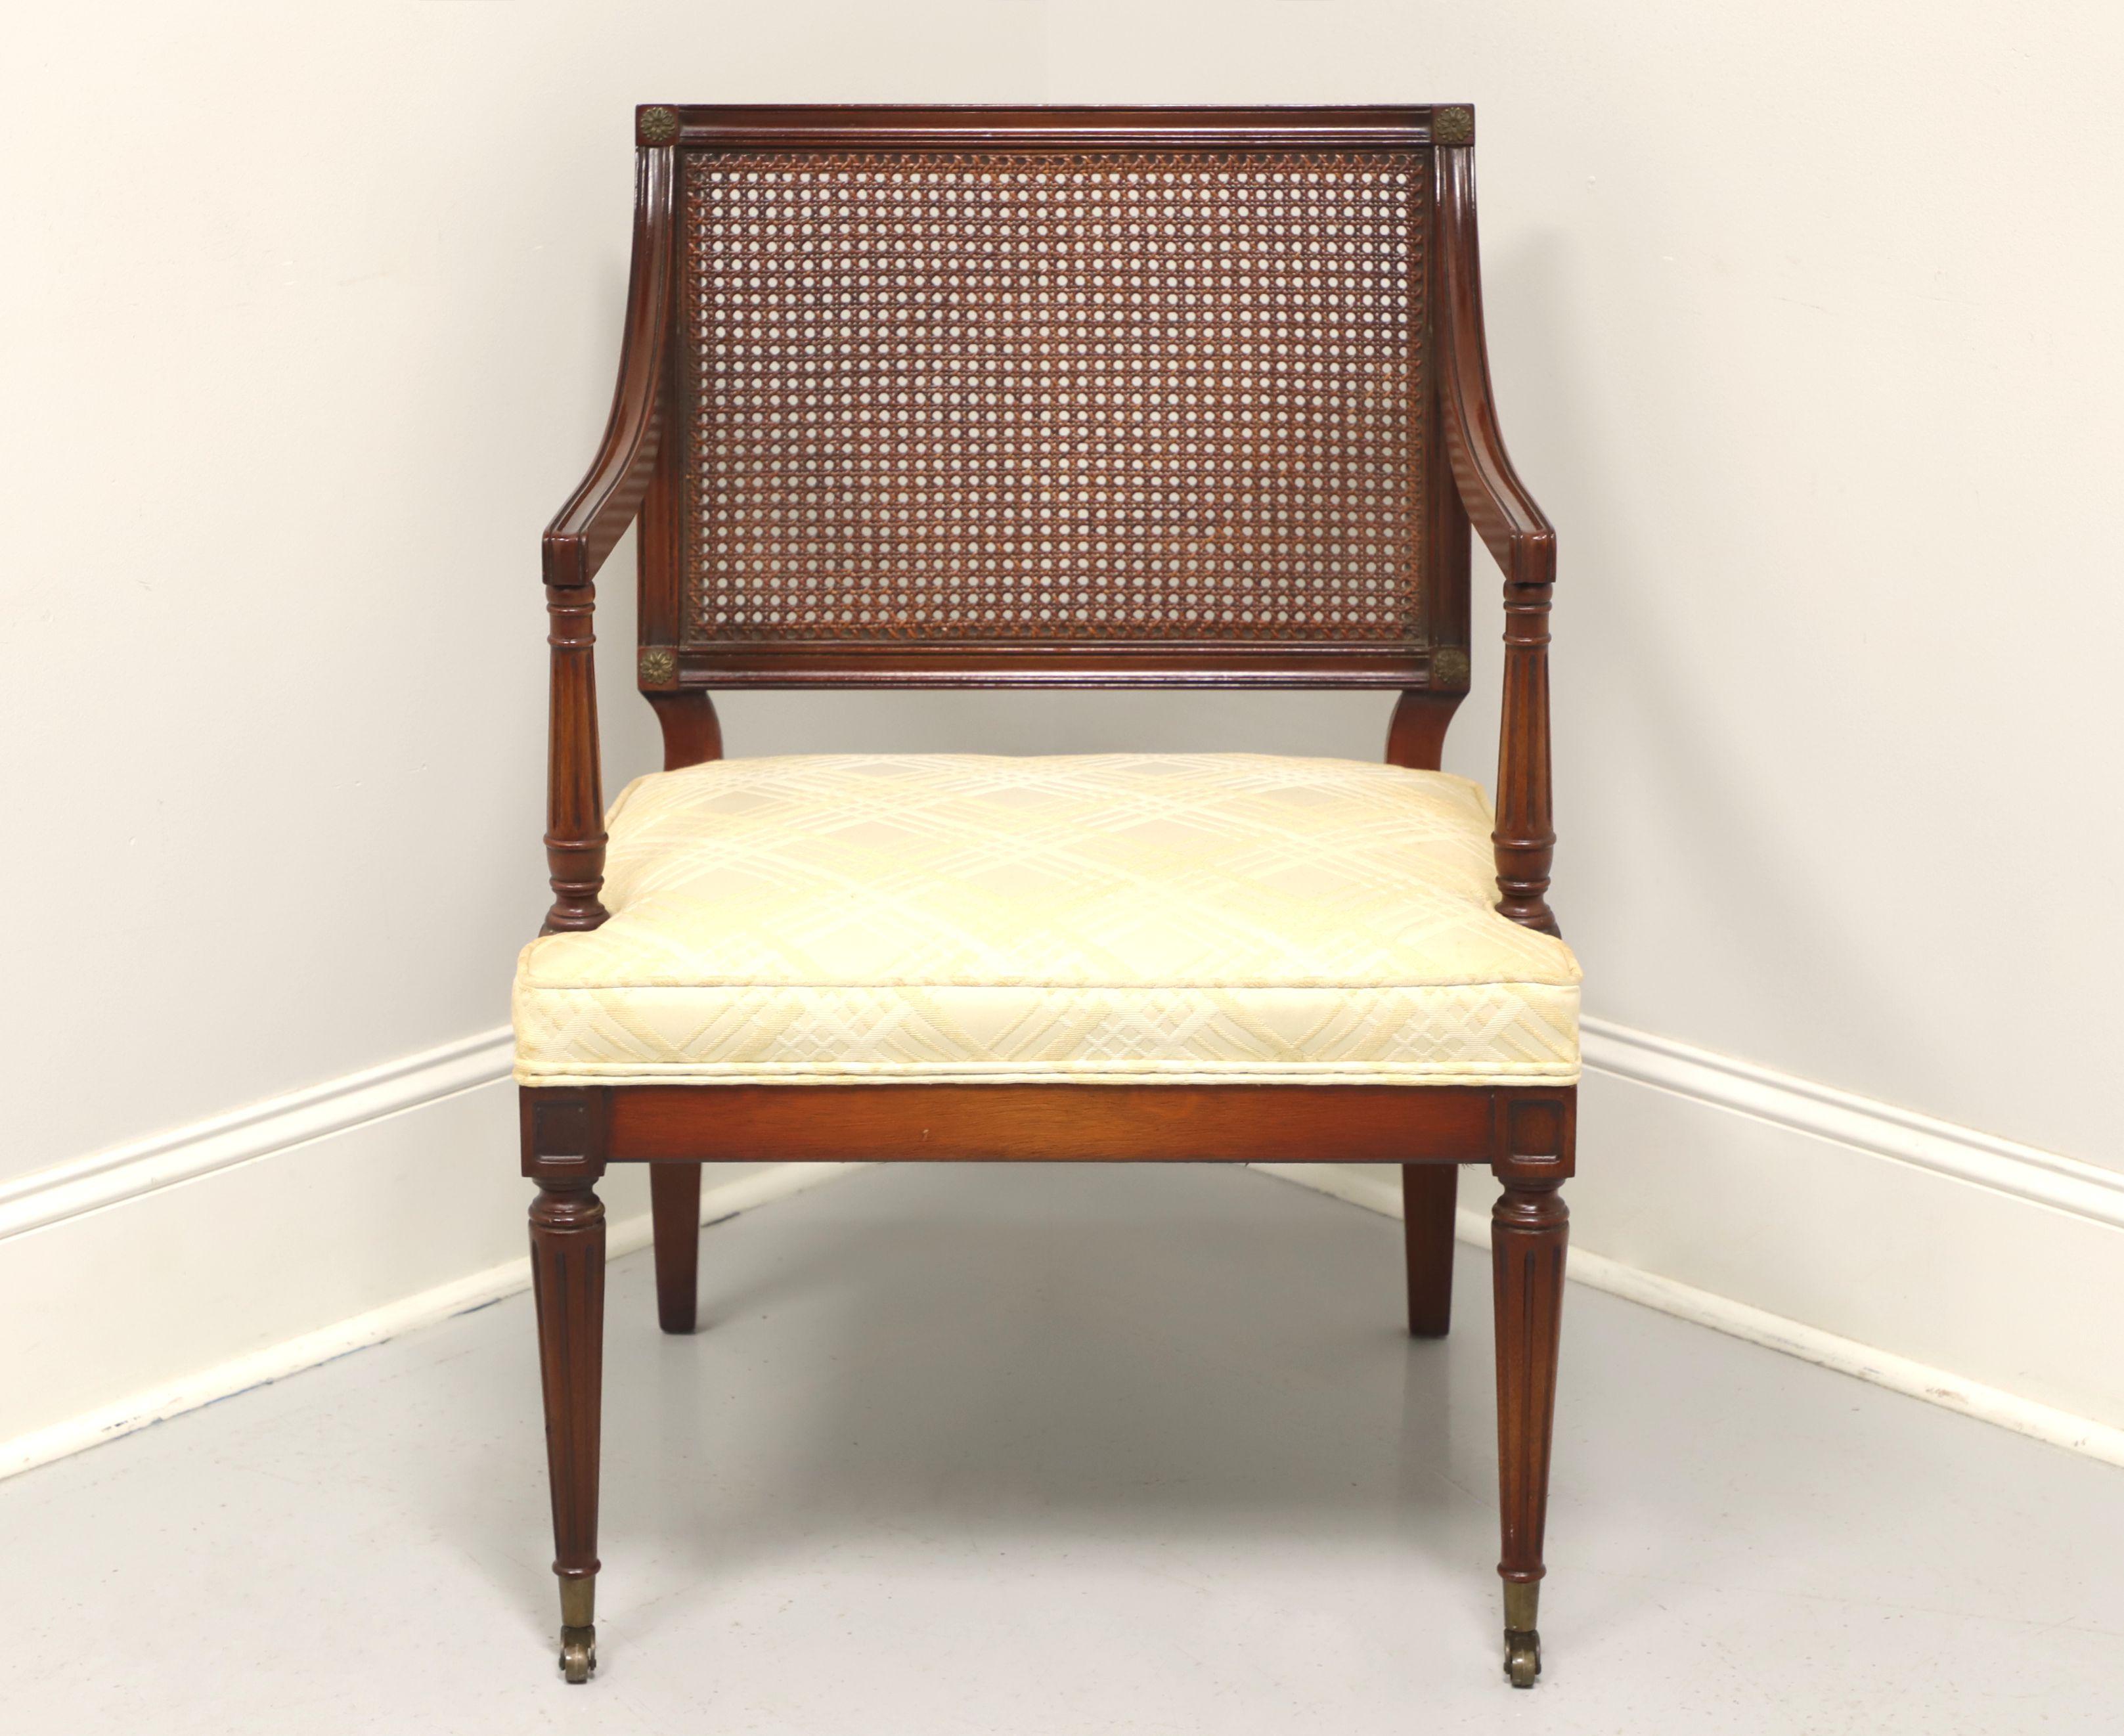 A French Provincial Louis XVI armchair, unbranded, similar quality to Henredon. Mahogany with cane back, fluted arms, neutral fabric upholstered seat, tapered fluted front legs on brass casters. Made in the USA, in the mid 20th Century.

Measures: